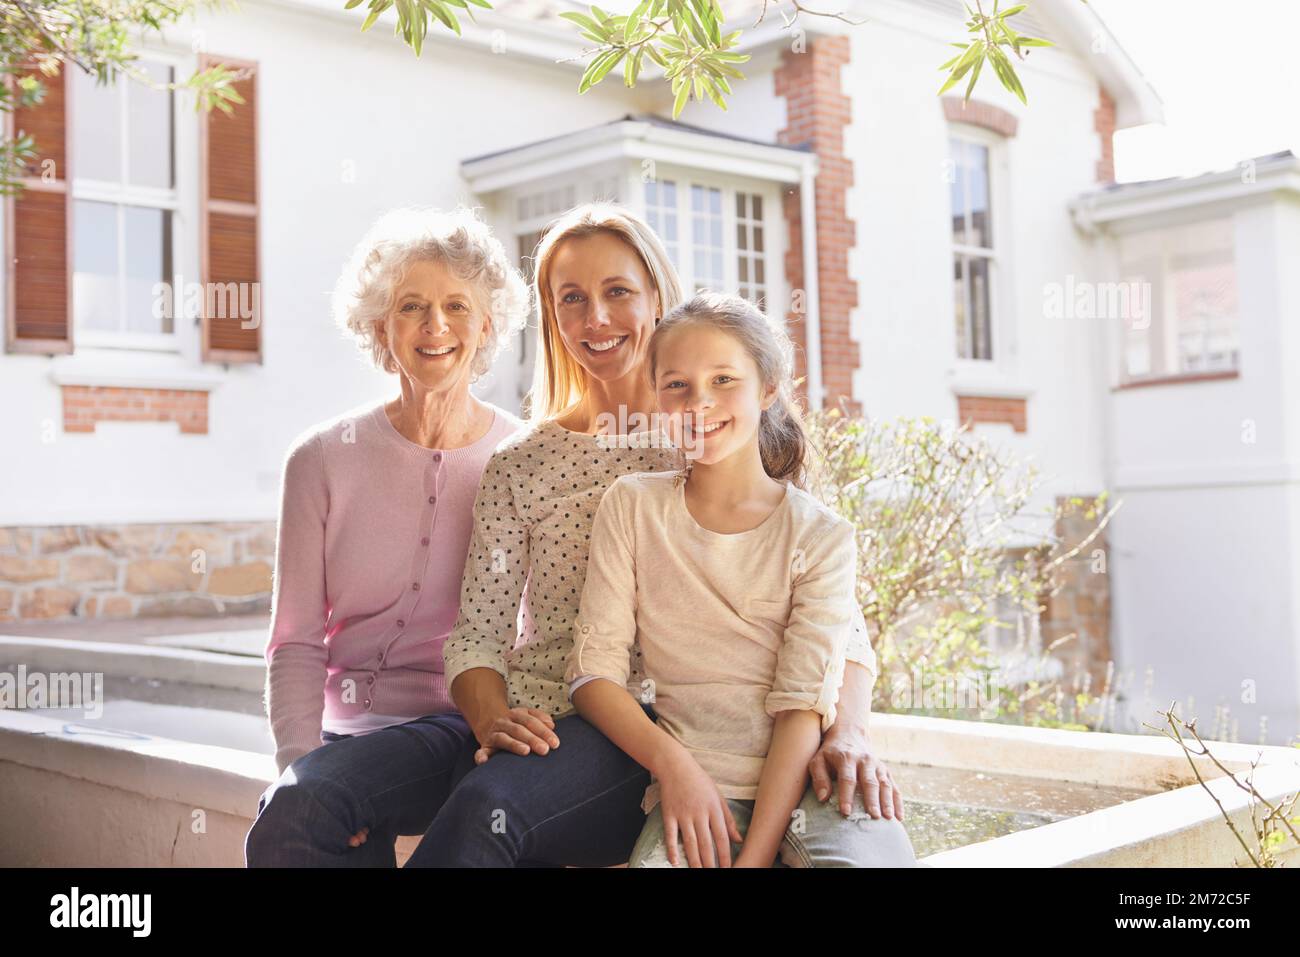 Three generations of happiness. A portrait of three generations of women sitting together. Stock Photo